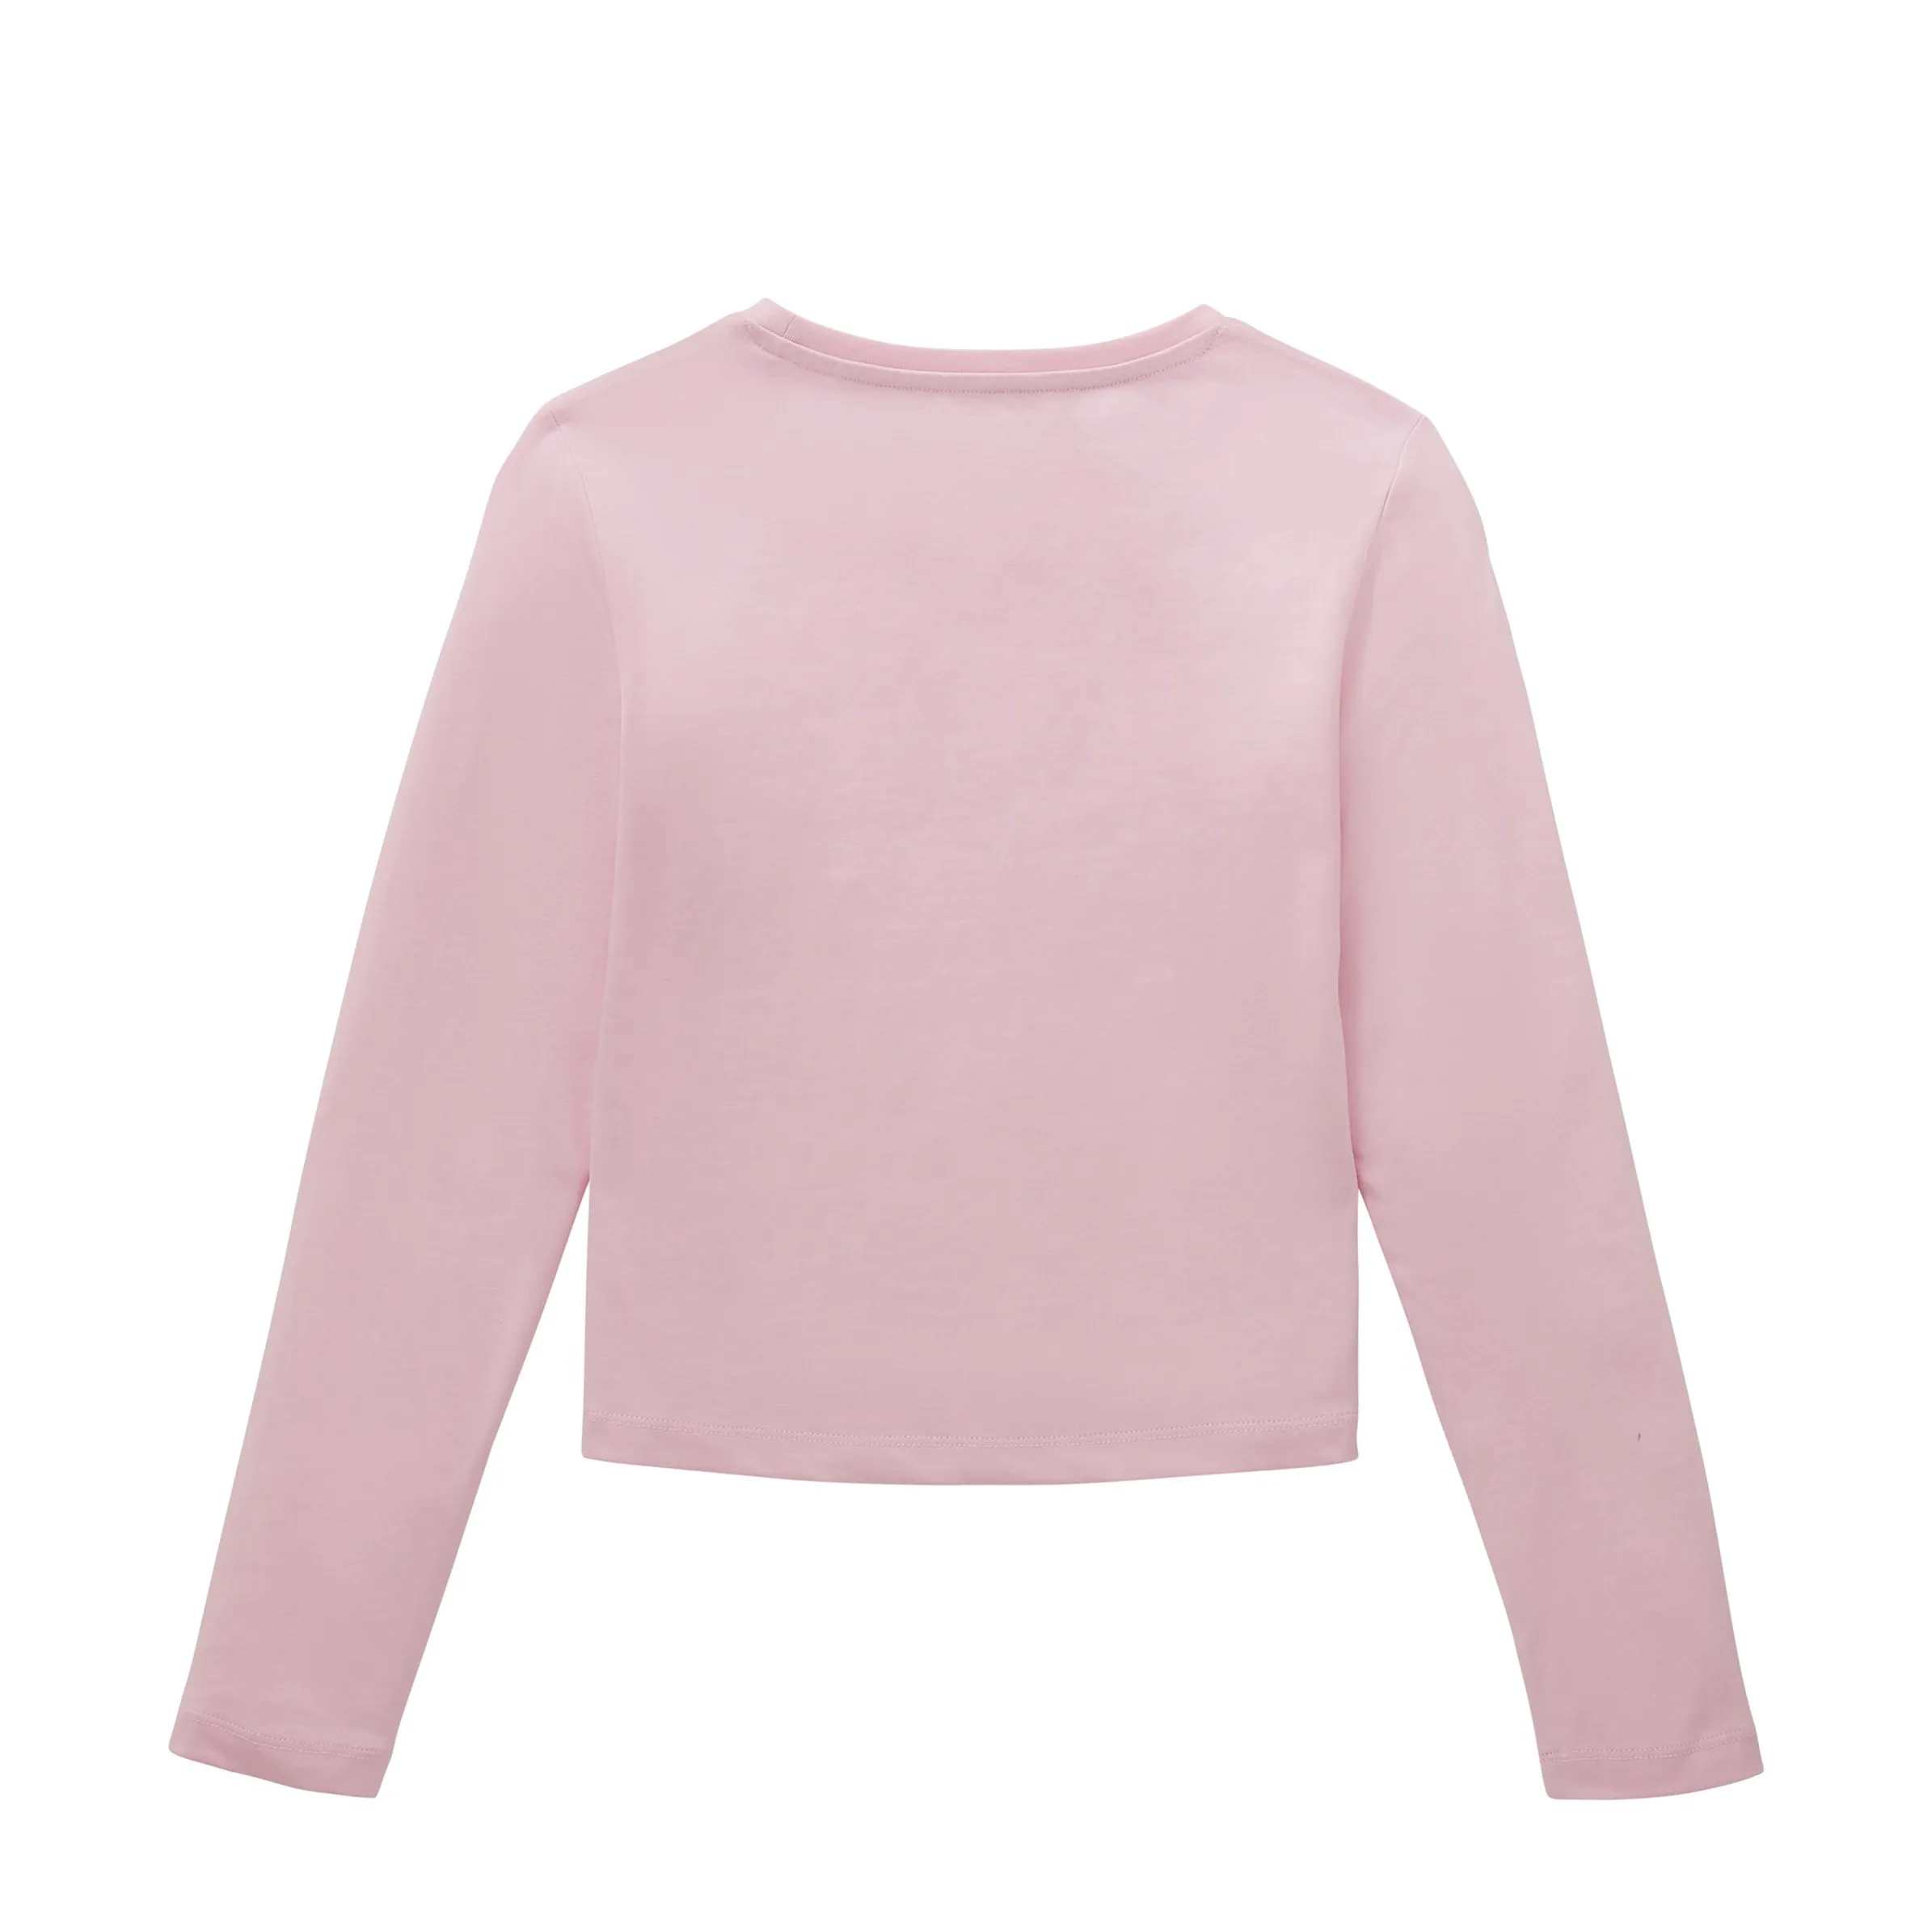 Tom Tailor 1037704 cropped longsleeve Pink 883482 32267 2